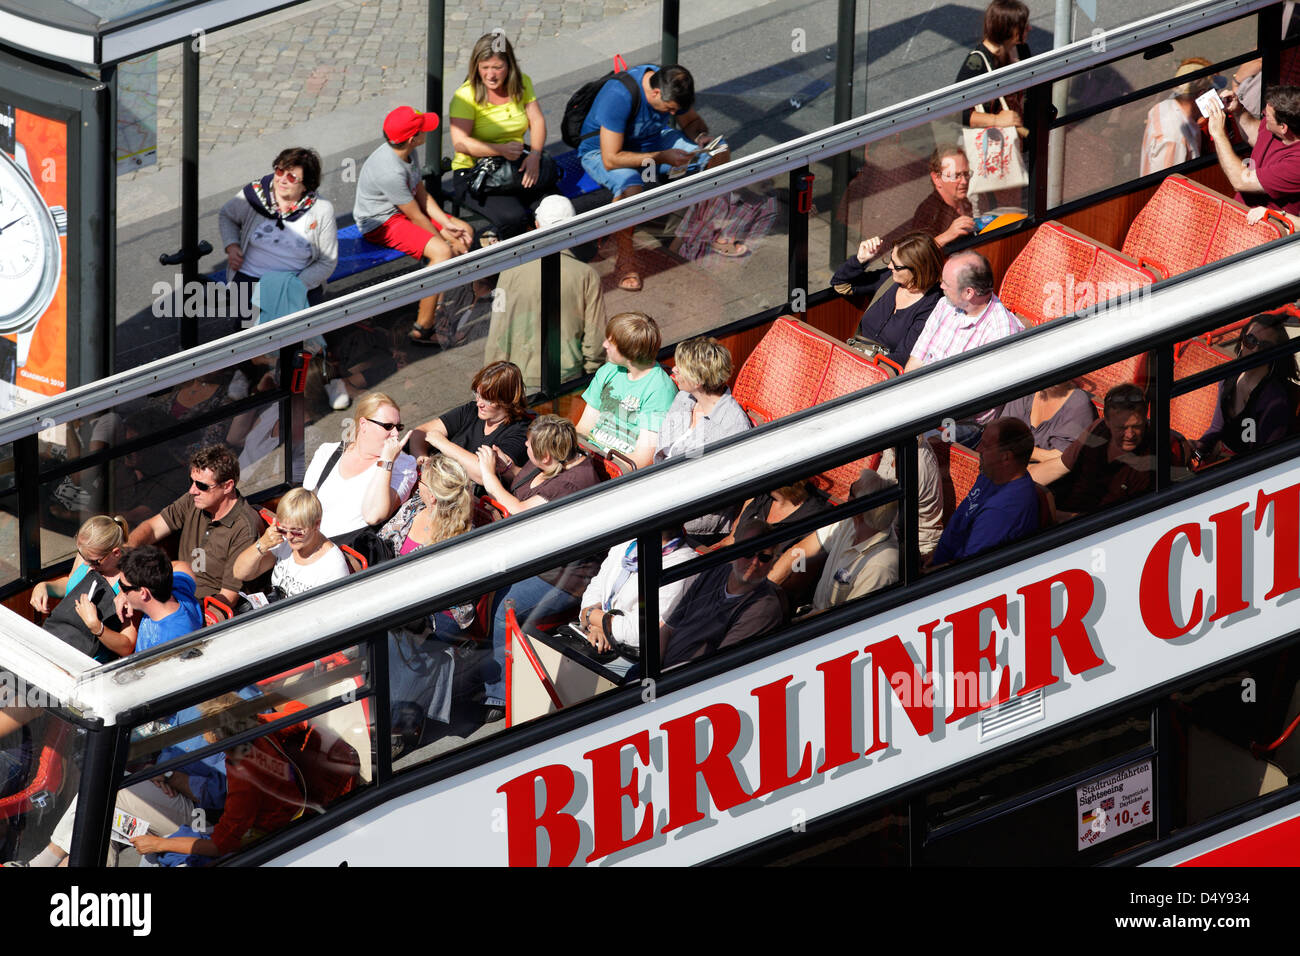 Berlin, Germany, tourists in an open double-decker bus for a city tour Stock Photo